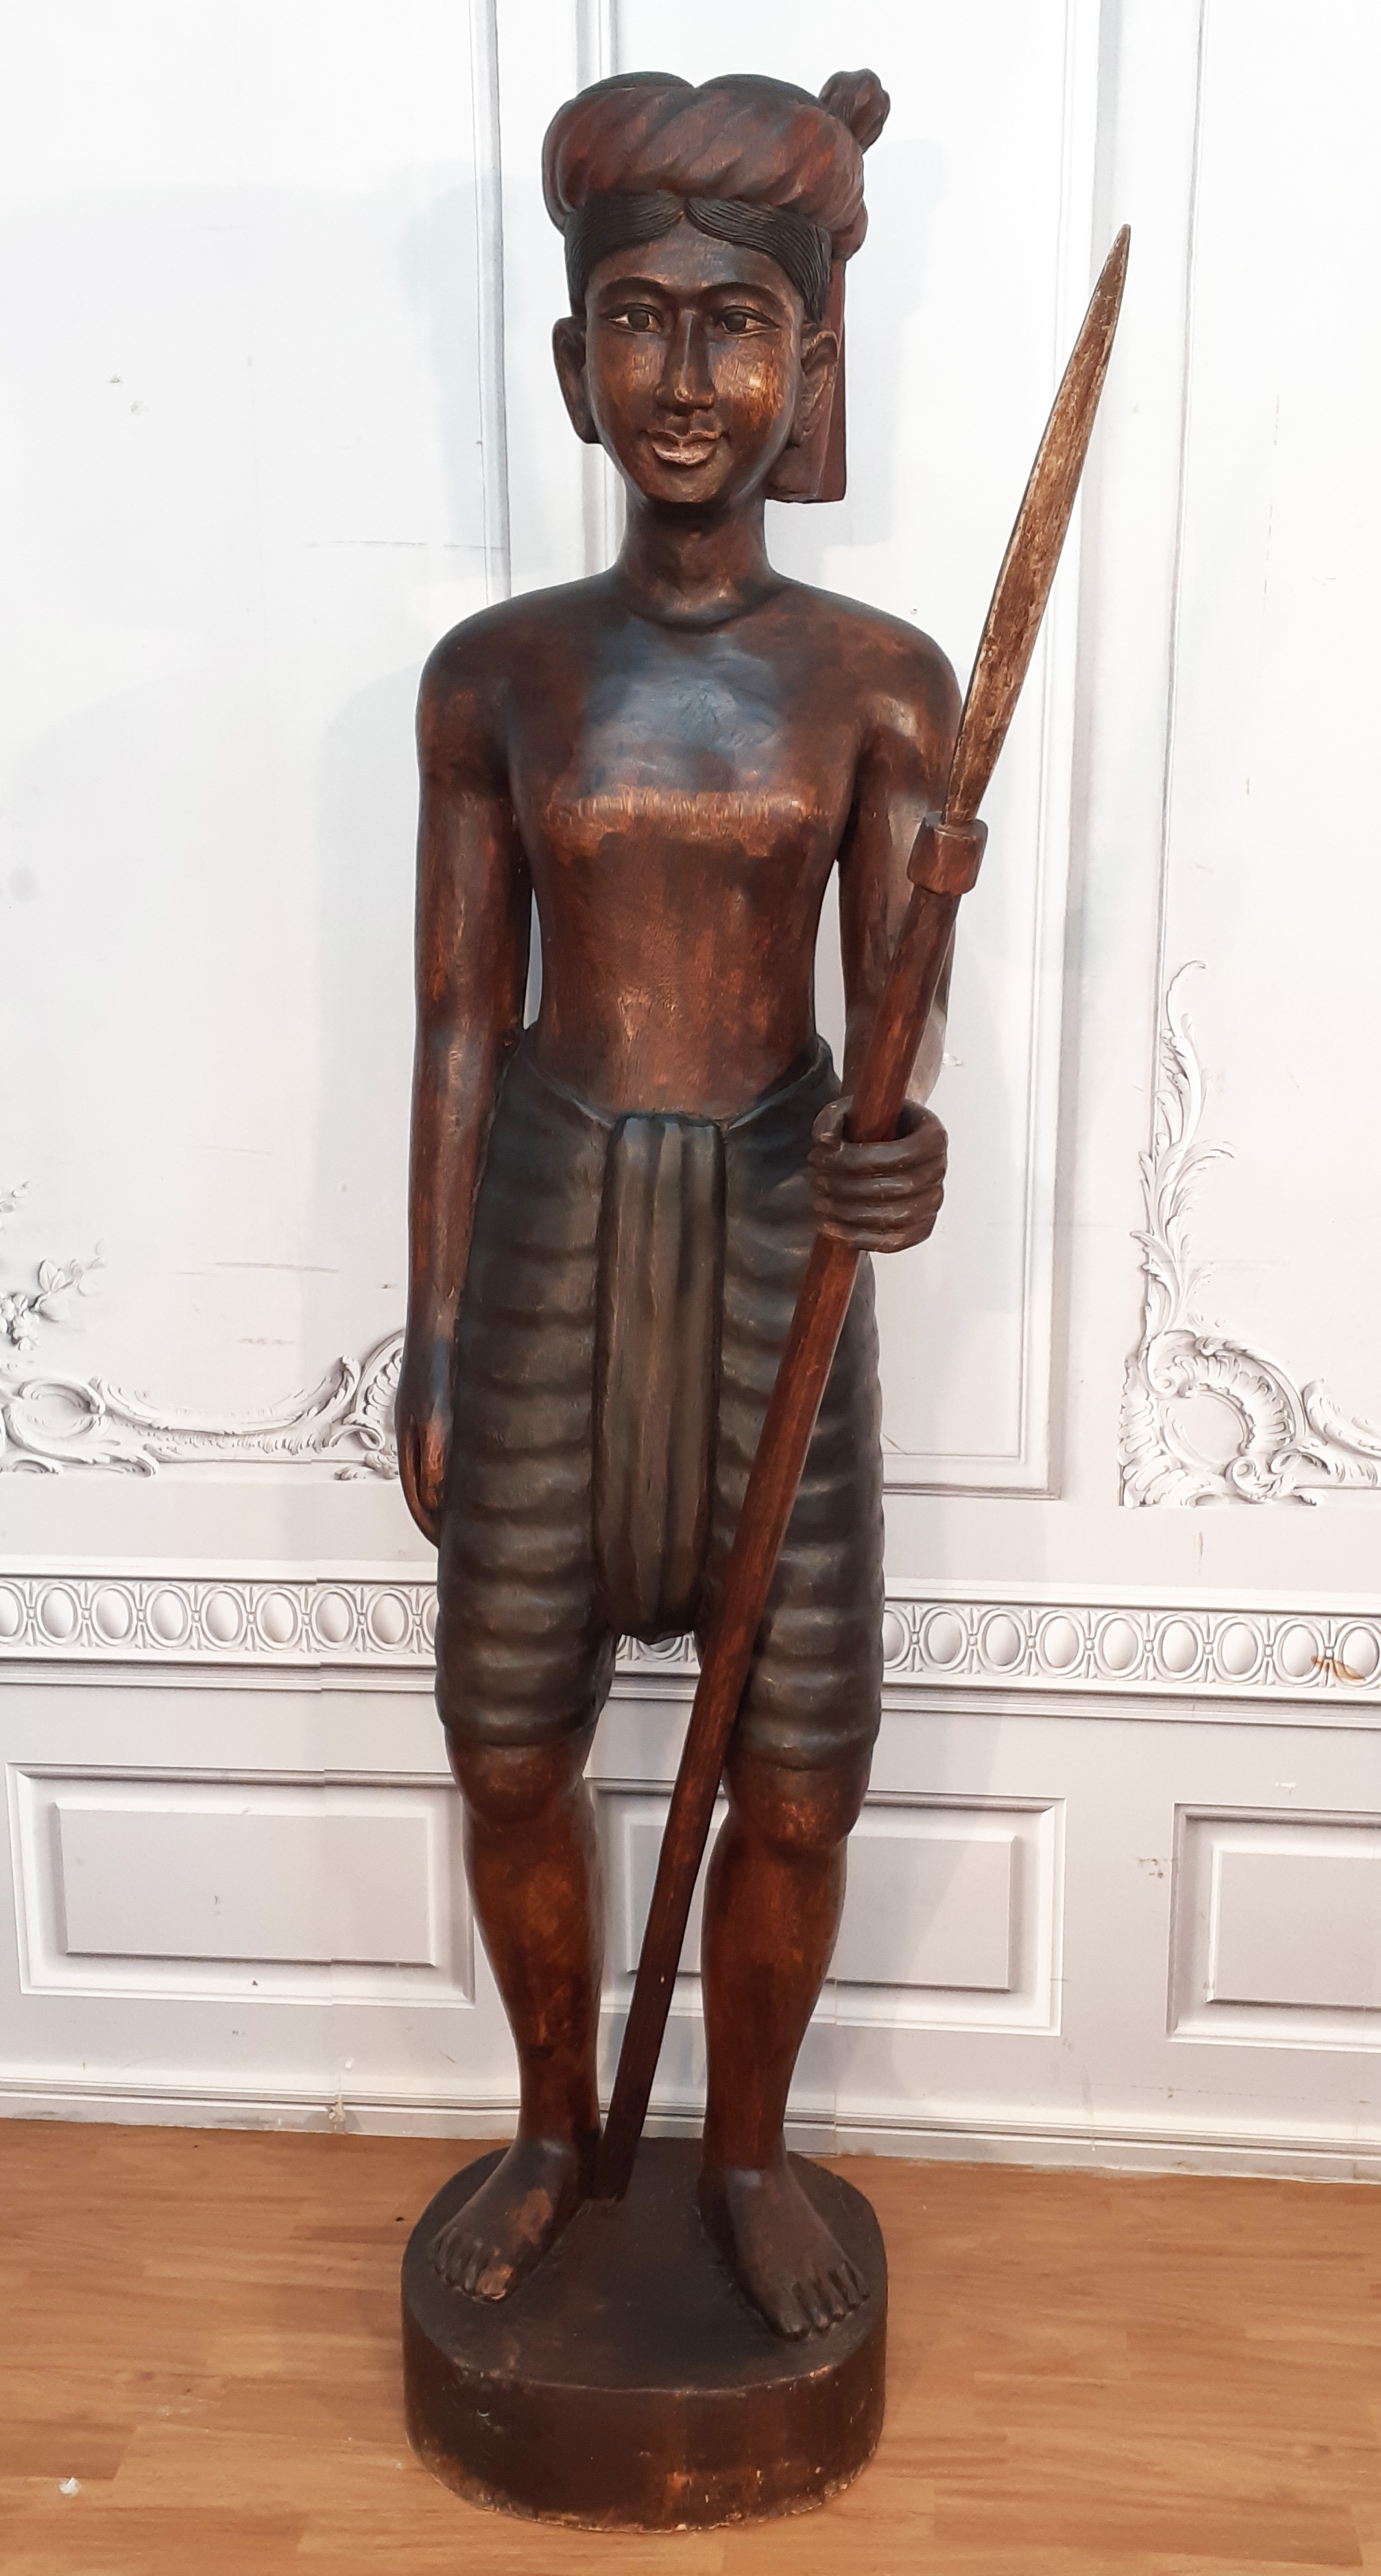 LIFE SIZE CARVED WOOD STATUE LIFE 35f0d6